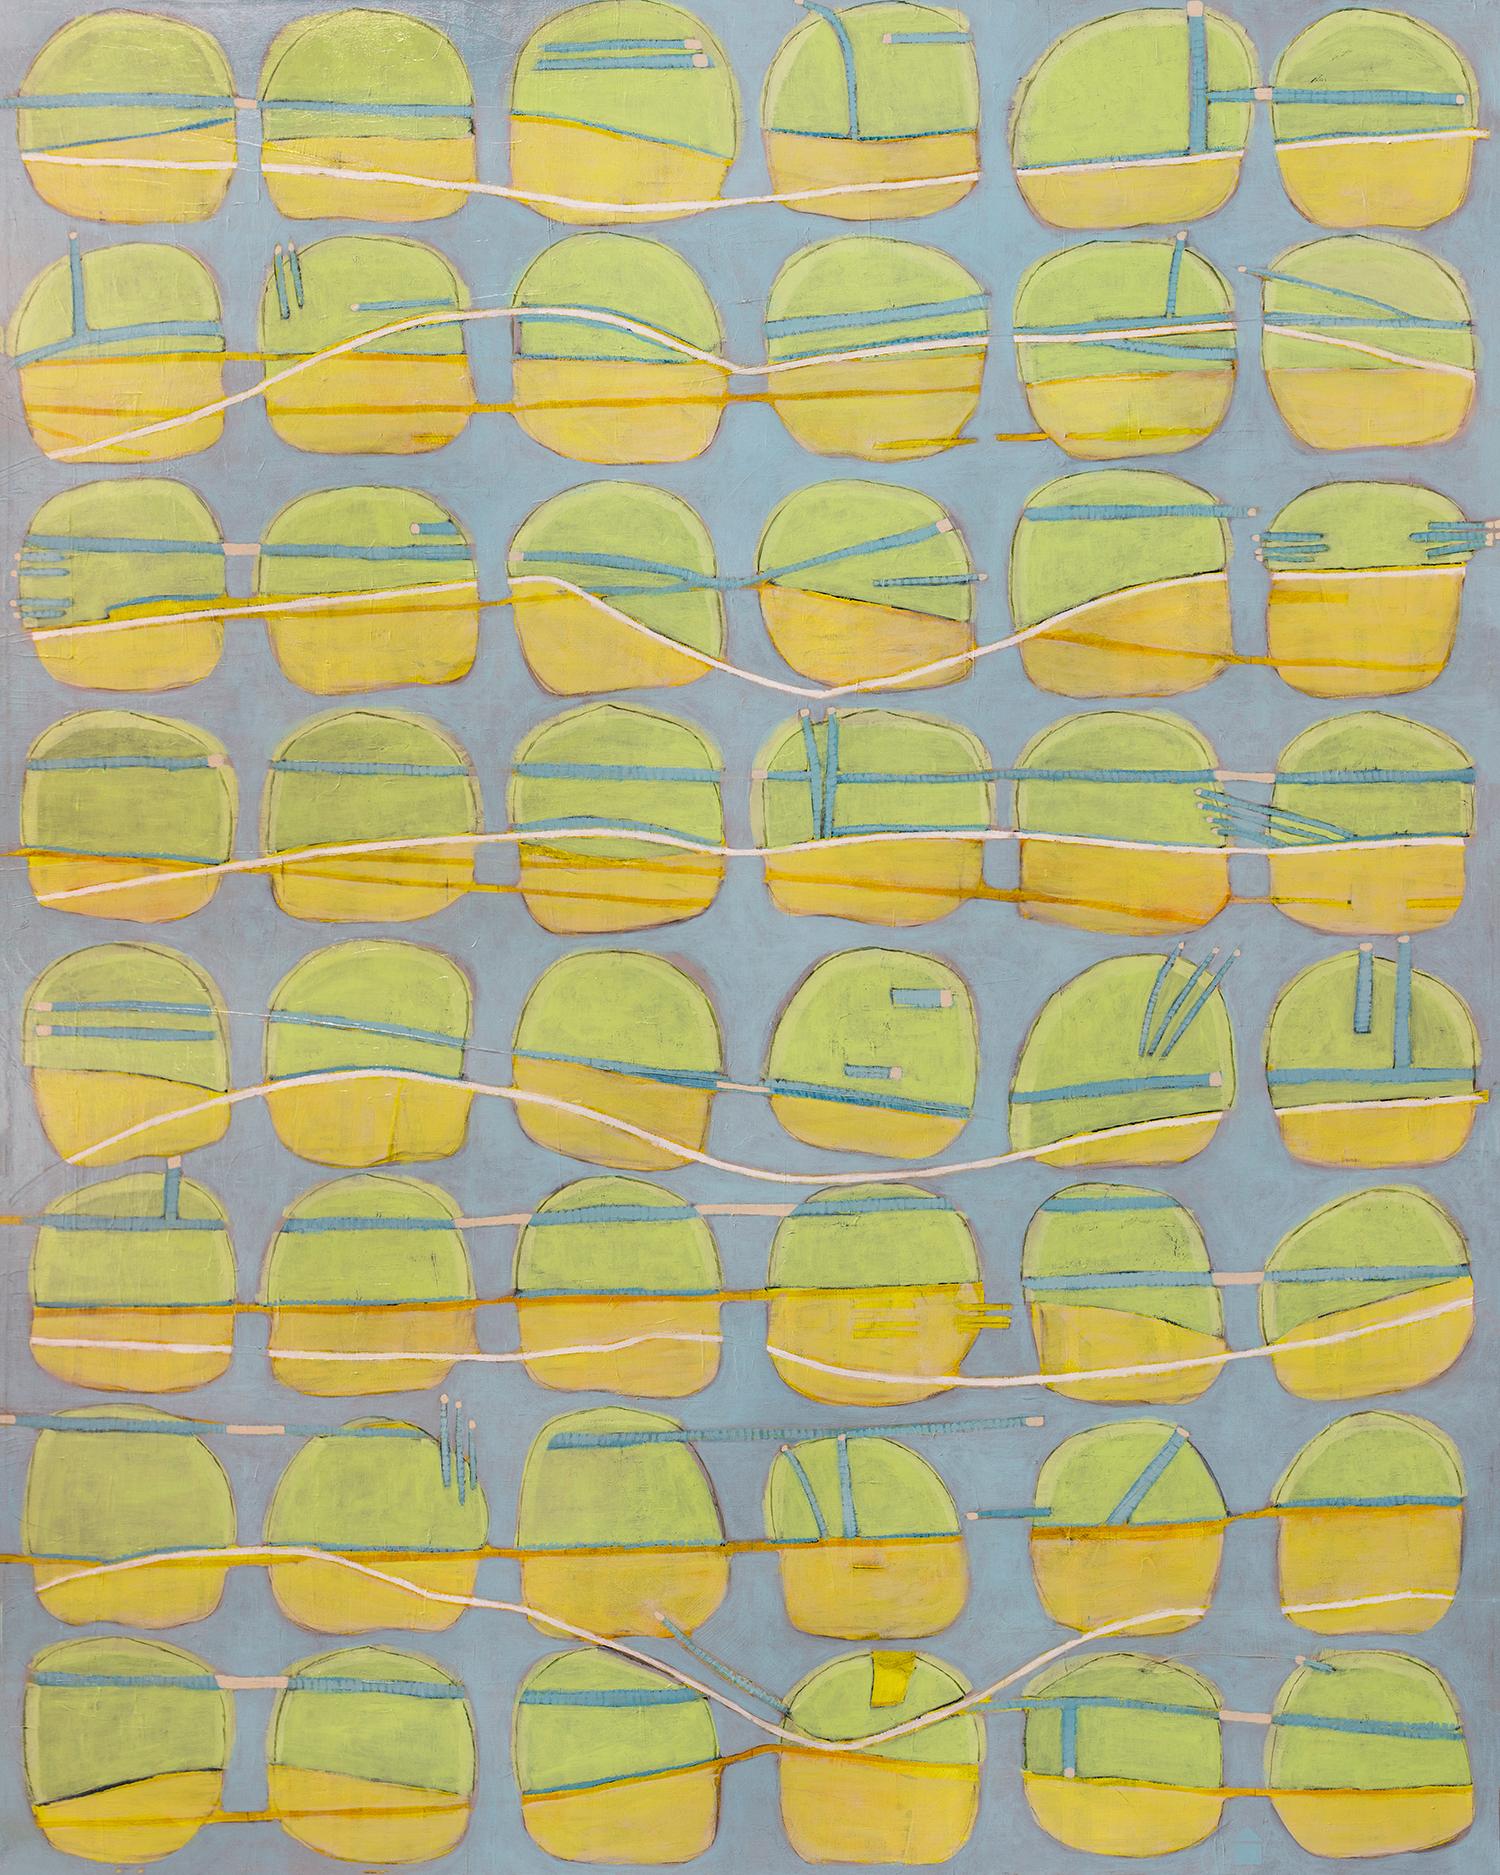 Sofie Swann Abstract Print - "Lemon Lime Goodness, " Limited Edition Giclee Print, 20 x 16